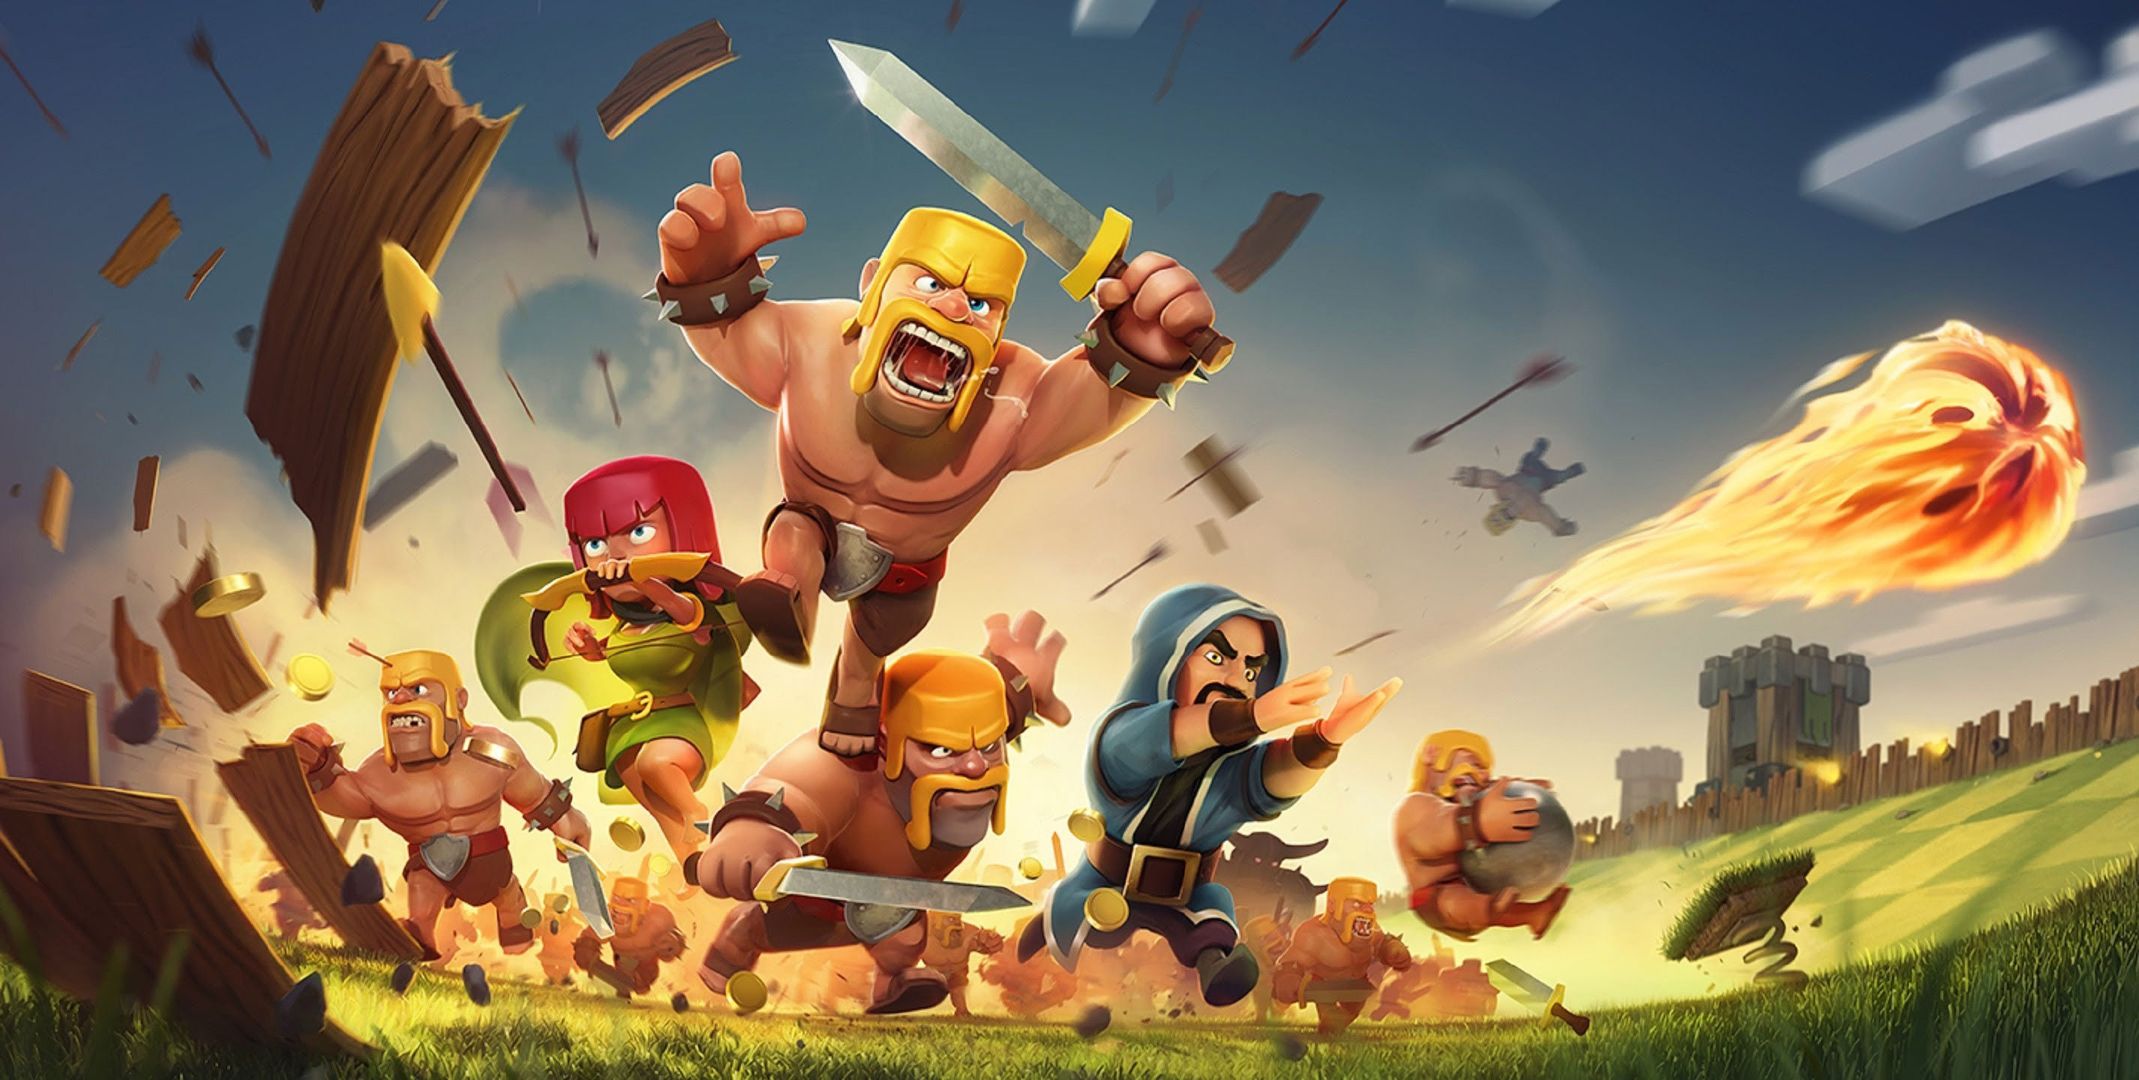 clash of clans, video game